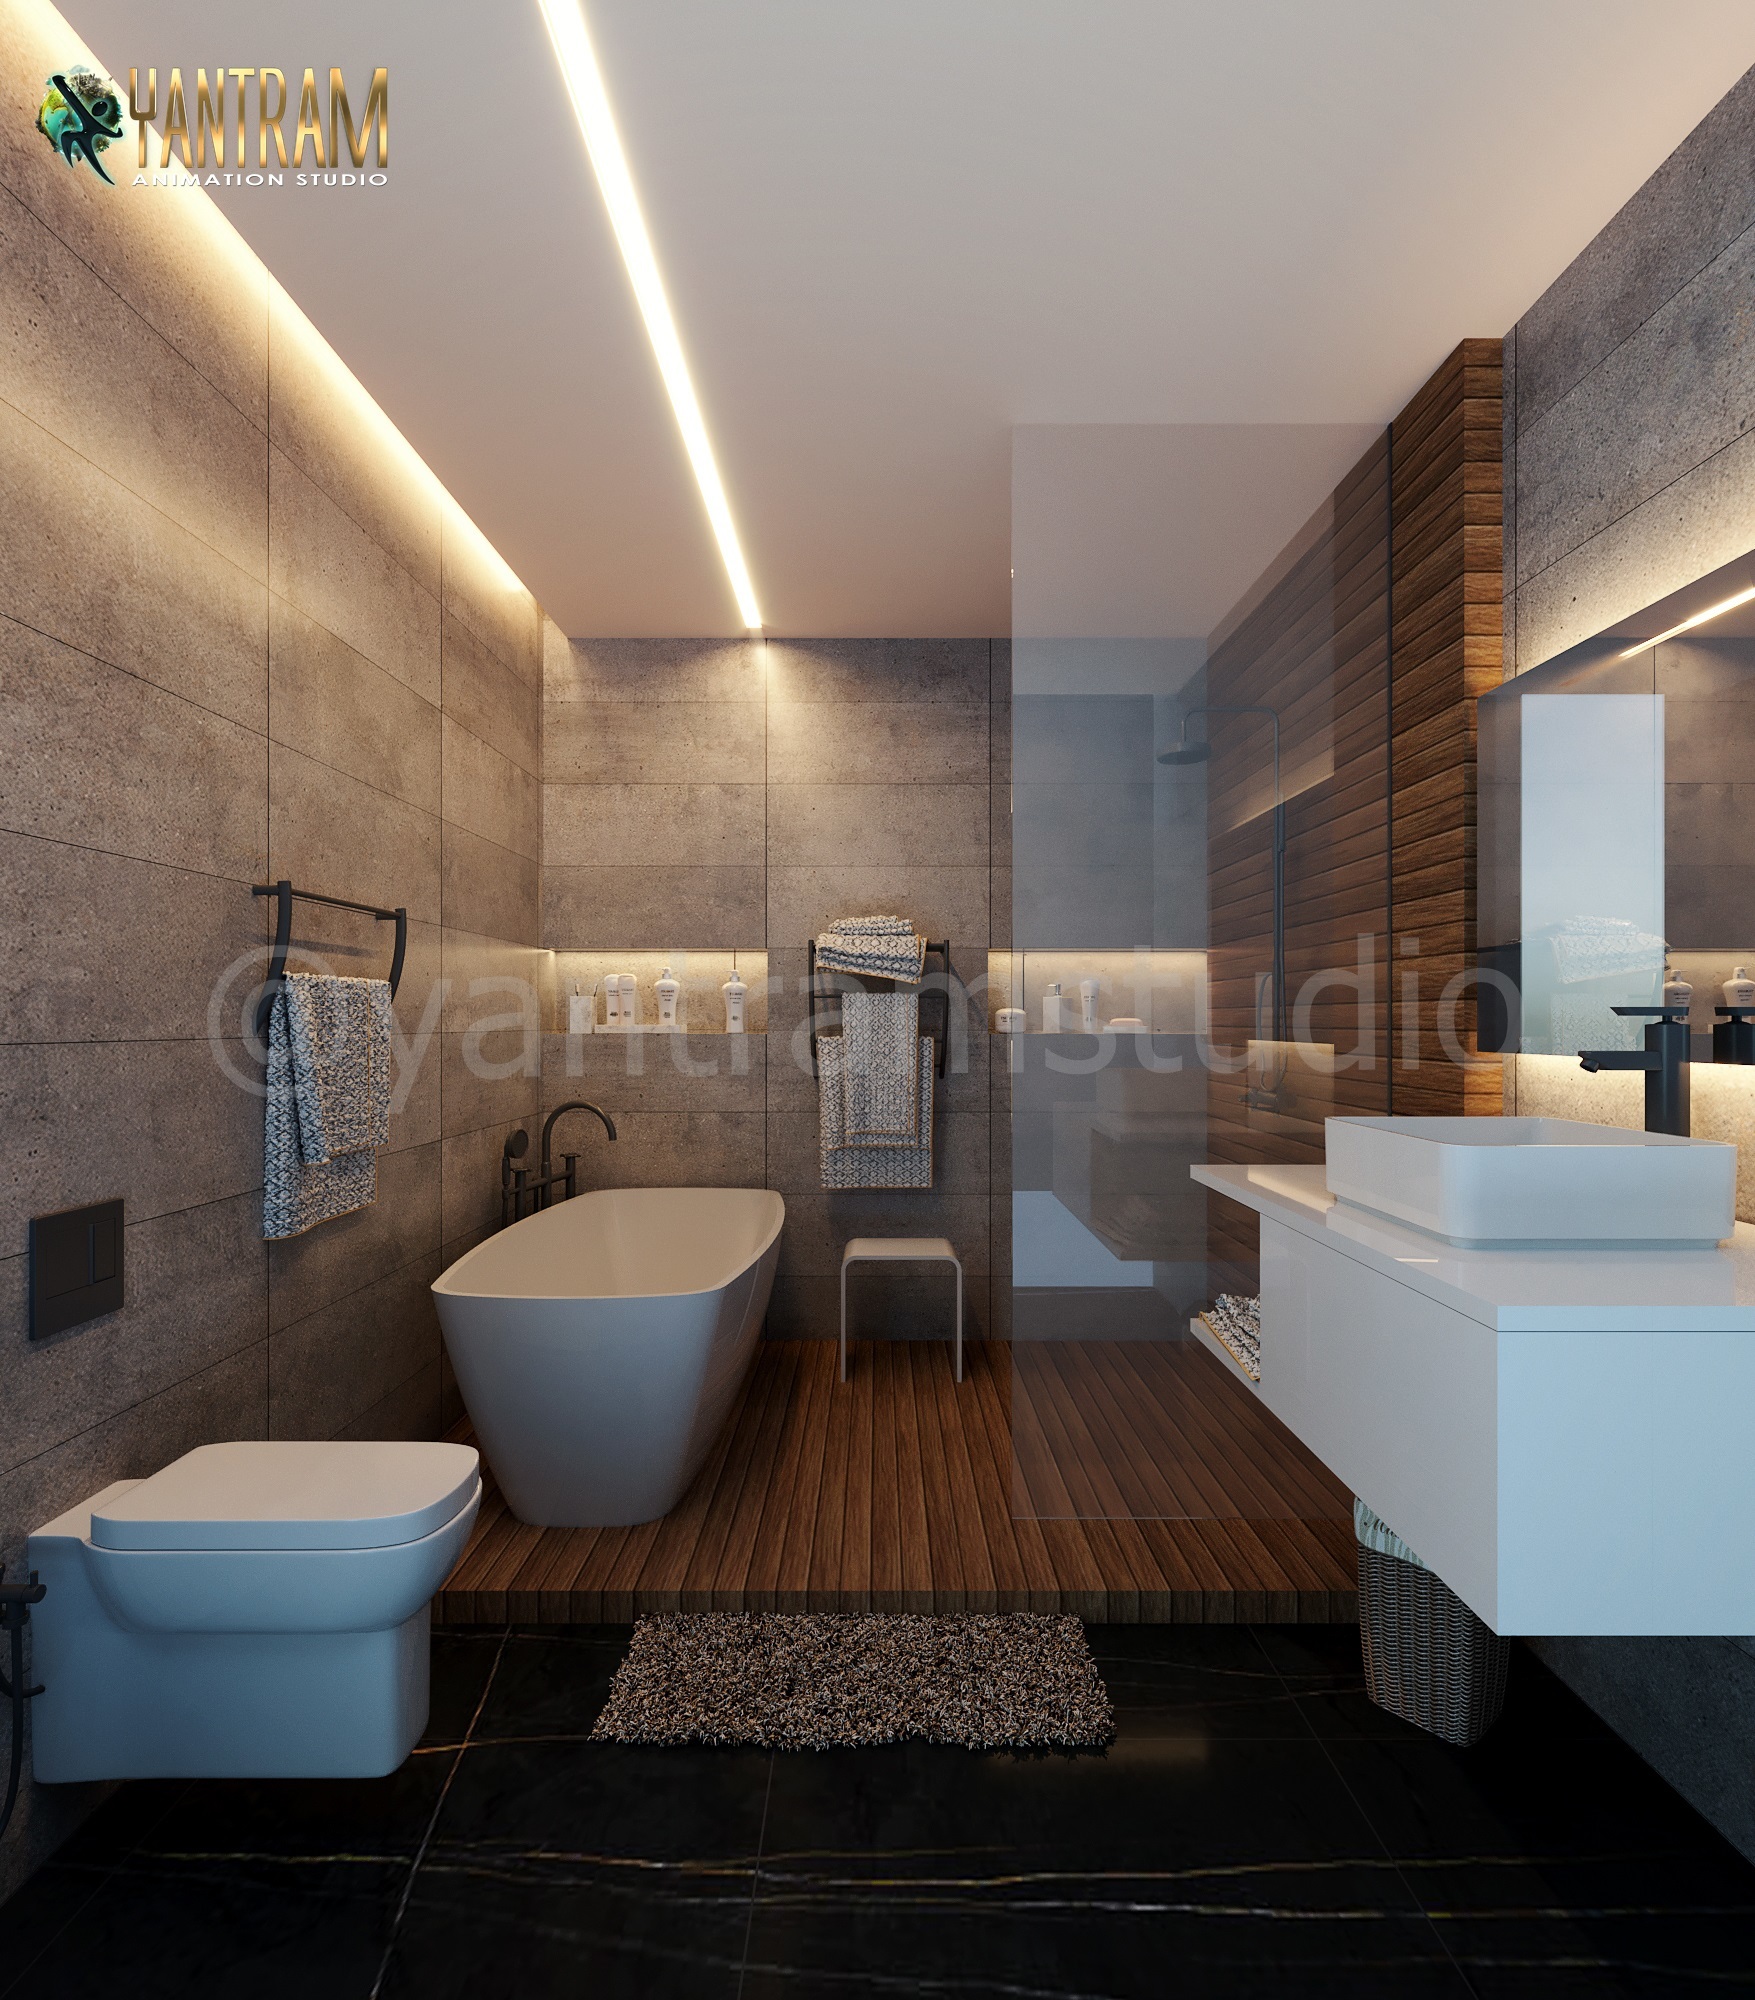 CGMEETUP - 3D Architectural Animation Services to Modern House by Yantram  Architectural Design Studio, Ahmedabad, India by Architectural design Studio